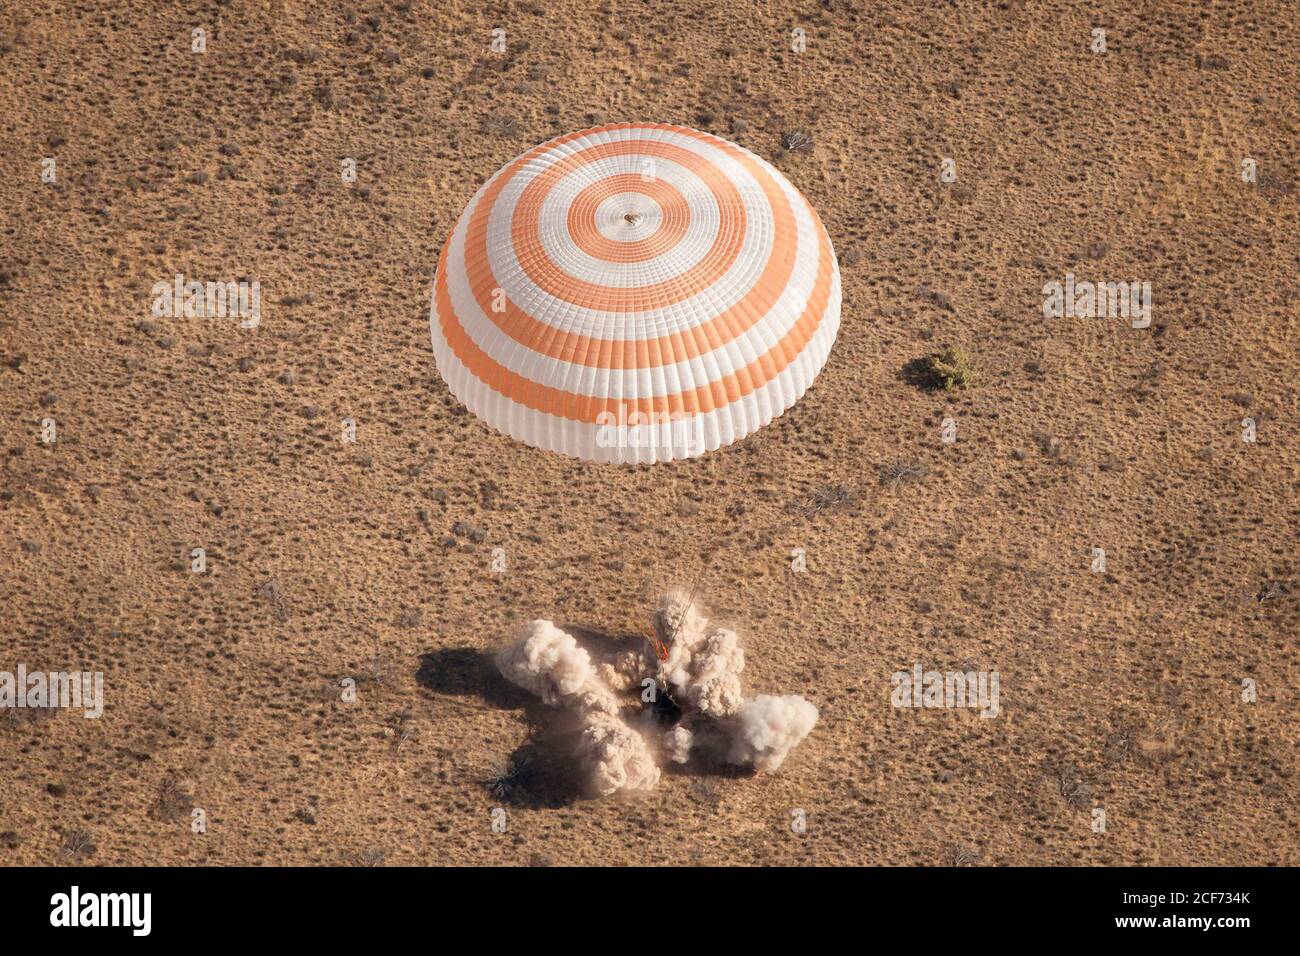 The Soyuz TMA-21 spacecraft is seen as it lands with Expedition 28 Commander Andrey Borisenko, and Flight Engineers Ron Garan, and Alexander Samokutyaev in a remote area outside of the town of Zhezkazgan, Kazakhstan, on Friday, Sept. 16, 2011. NASA Astronaut Garan, Russian Cosmonauts Borisenko and Samokutyaev are returning from more than five months onboard the International Space Station where they served as members of the Expedition 27 and 28 crews. Photo Credit: (NASA/Bill Ingalls) Stock Photo